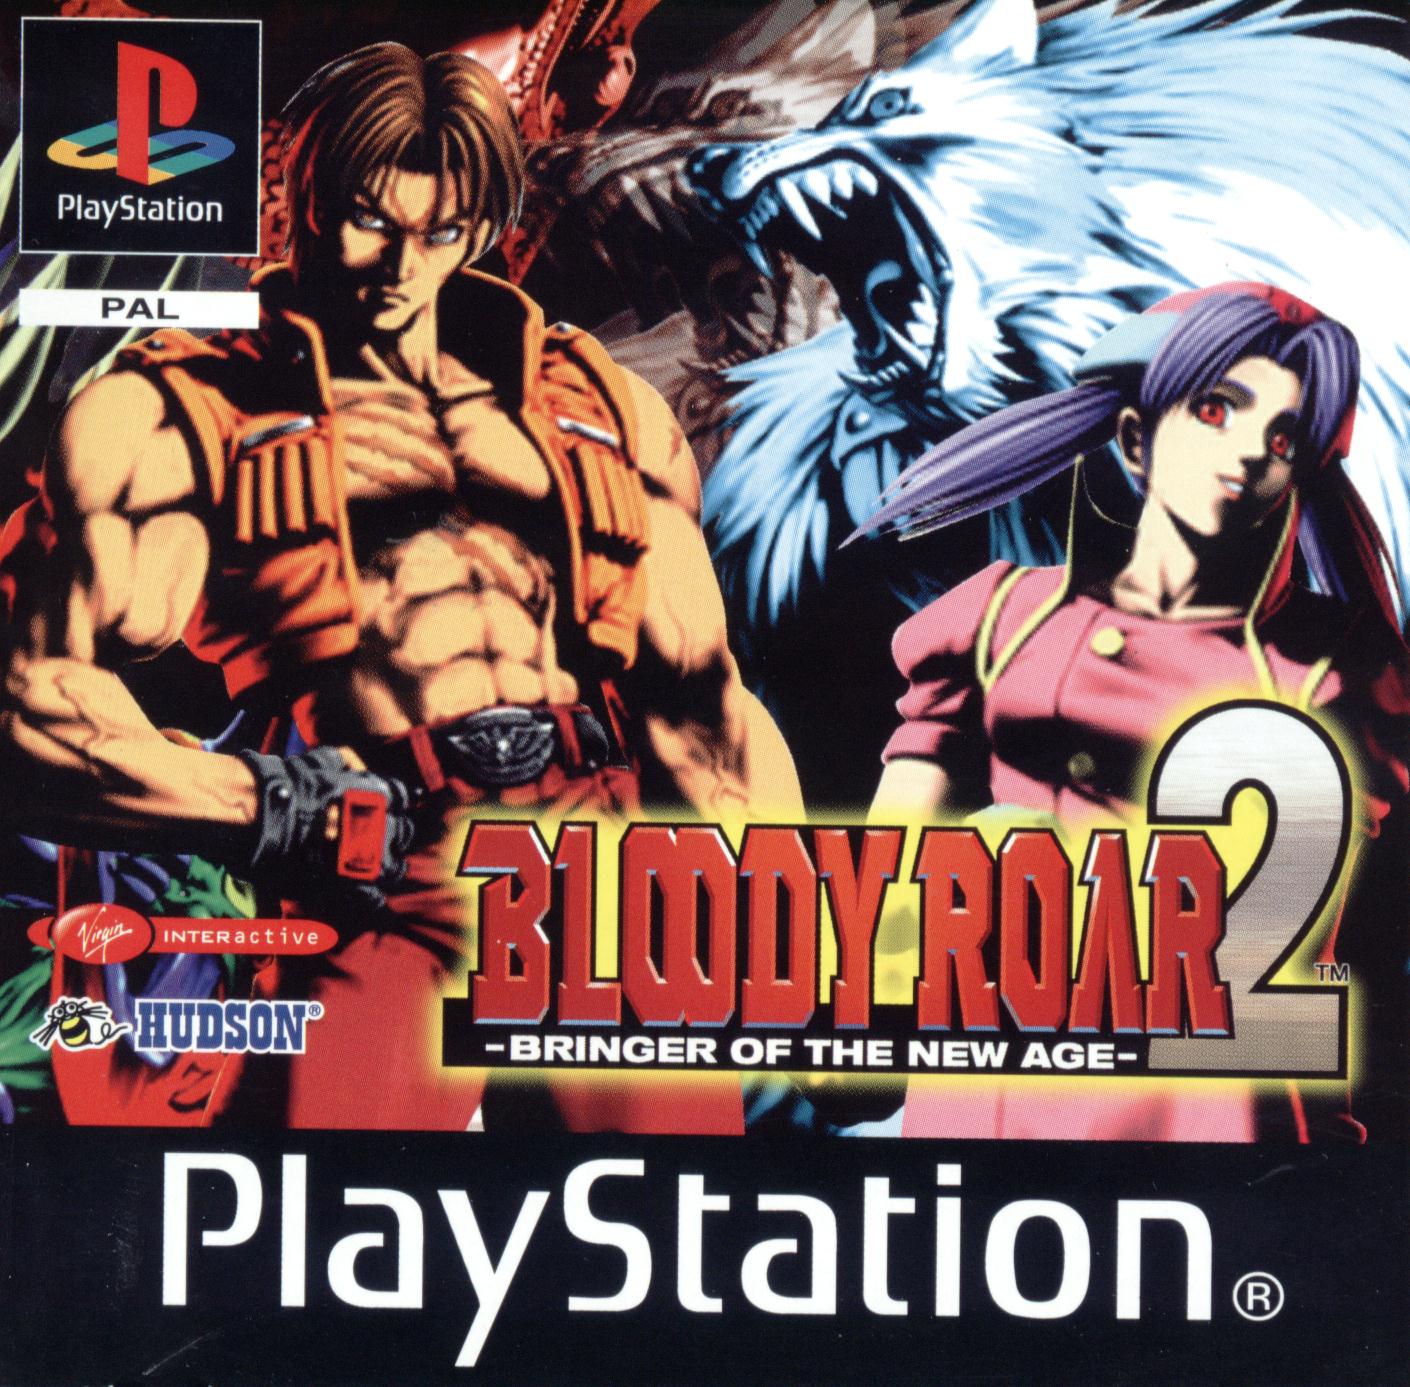 Bloody roar 2 psx save game